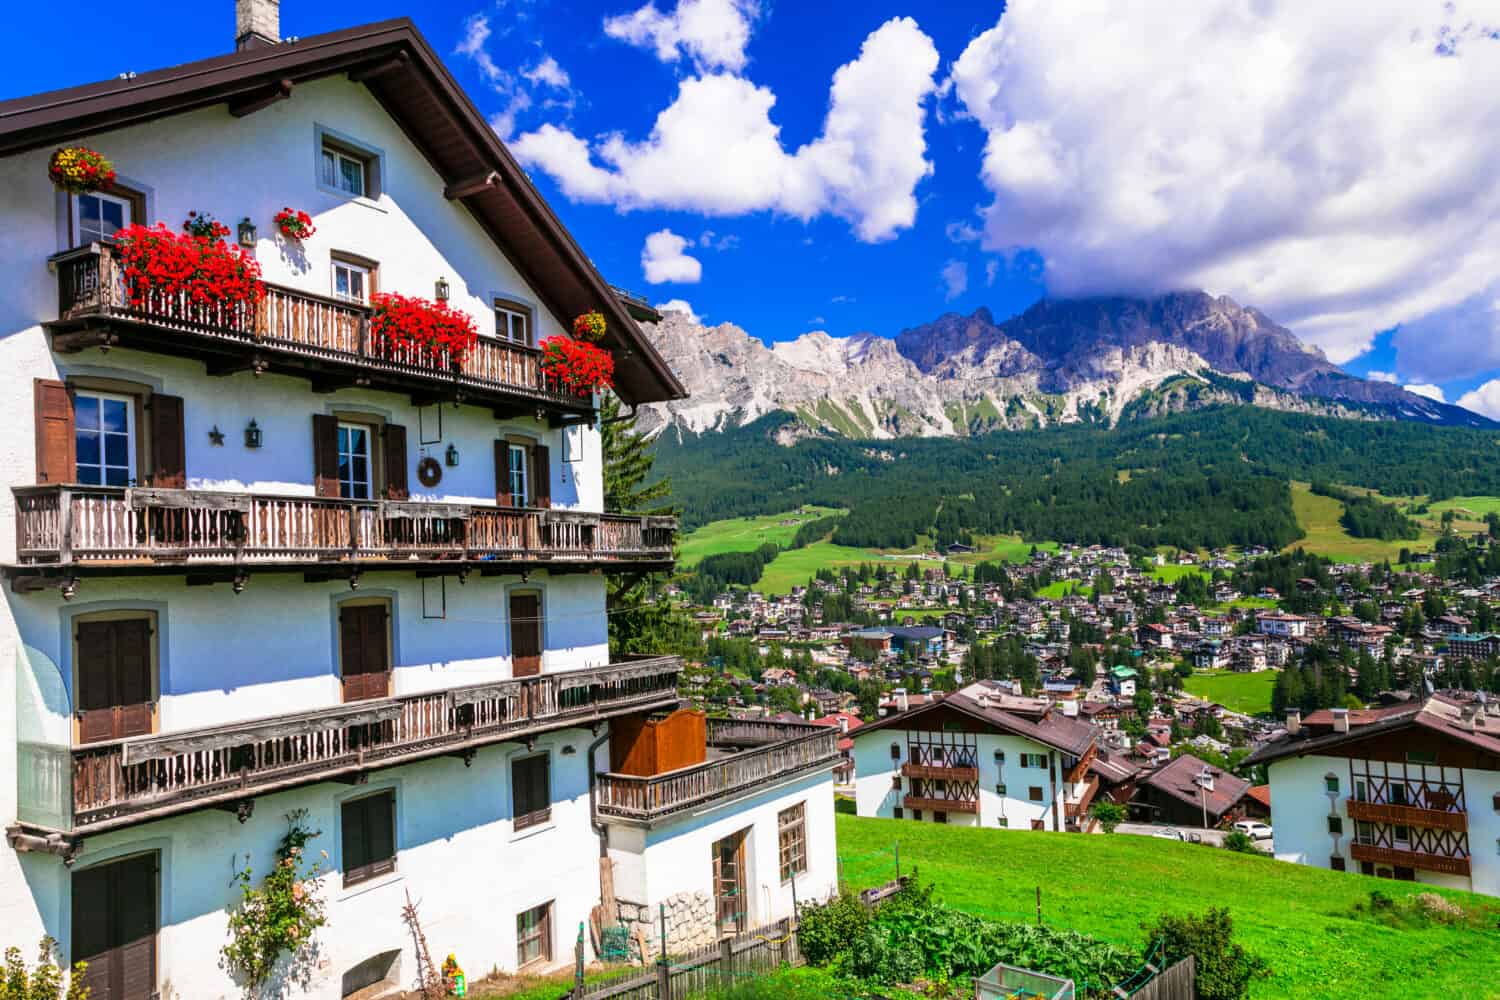 Wonderful valley in Cortina d'Ampezzo - famous ski in northern Italy, Belluno province